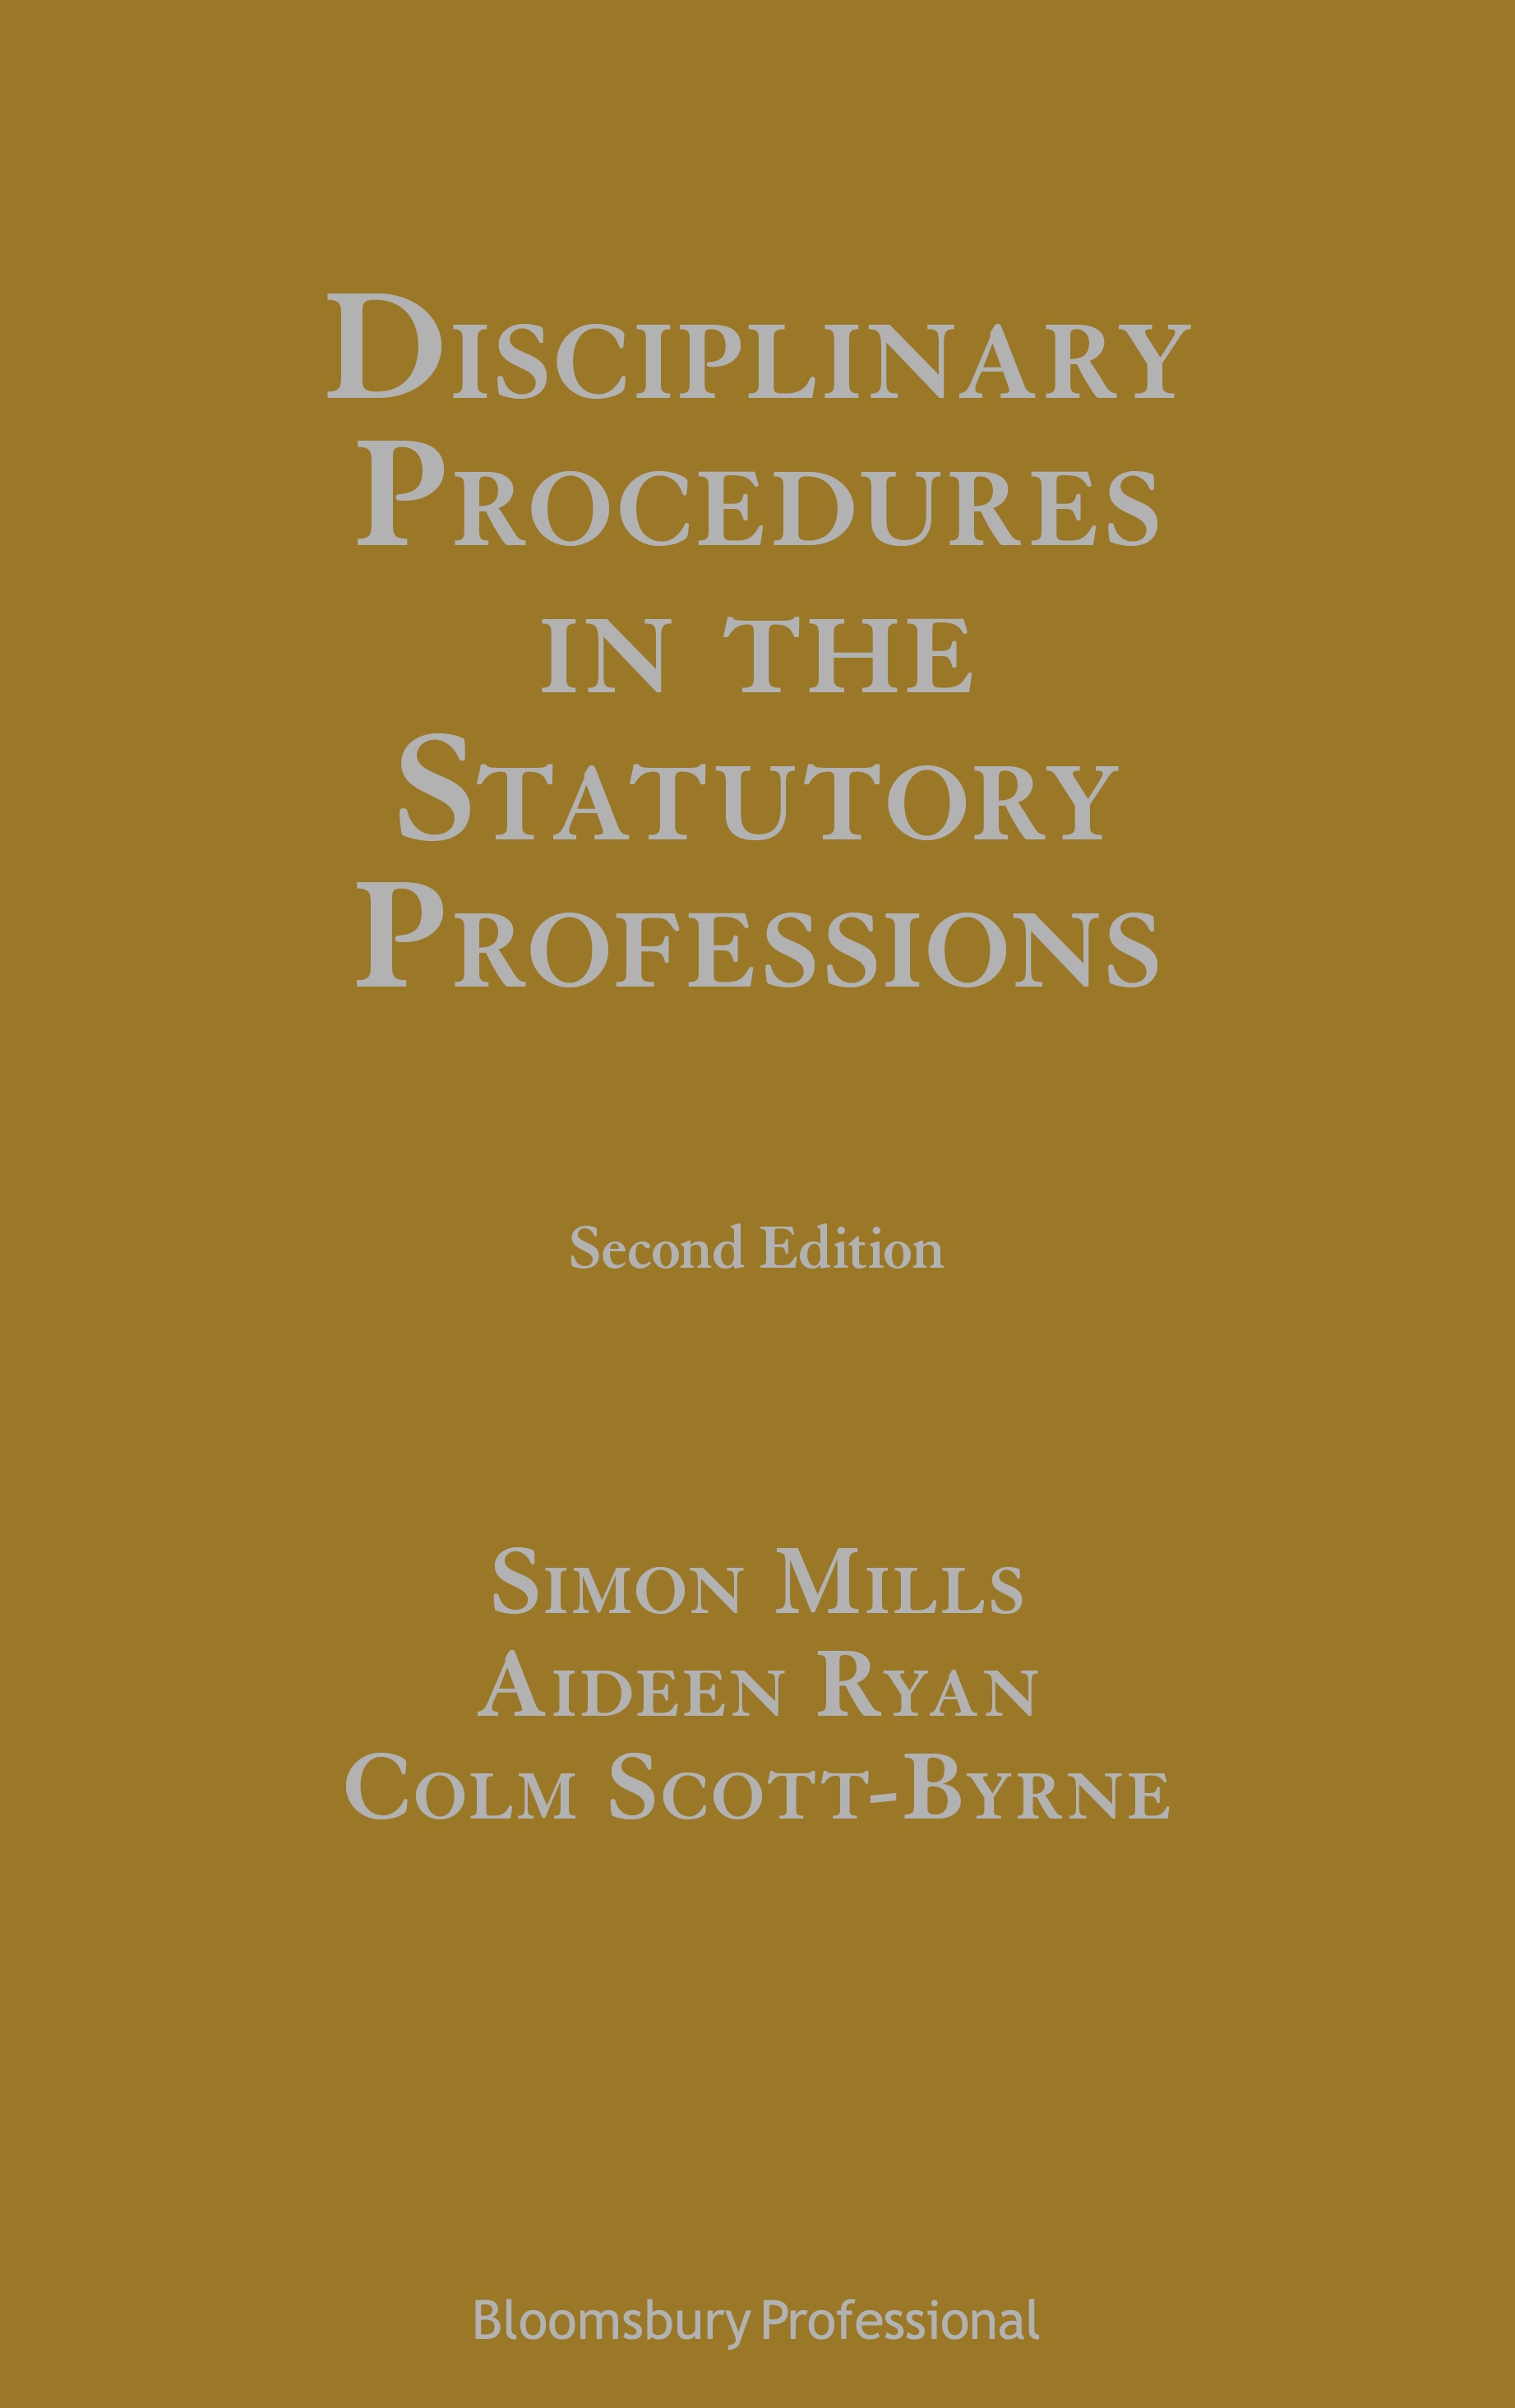 Disciplinary Procedures in the Statutory Professions book jacket